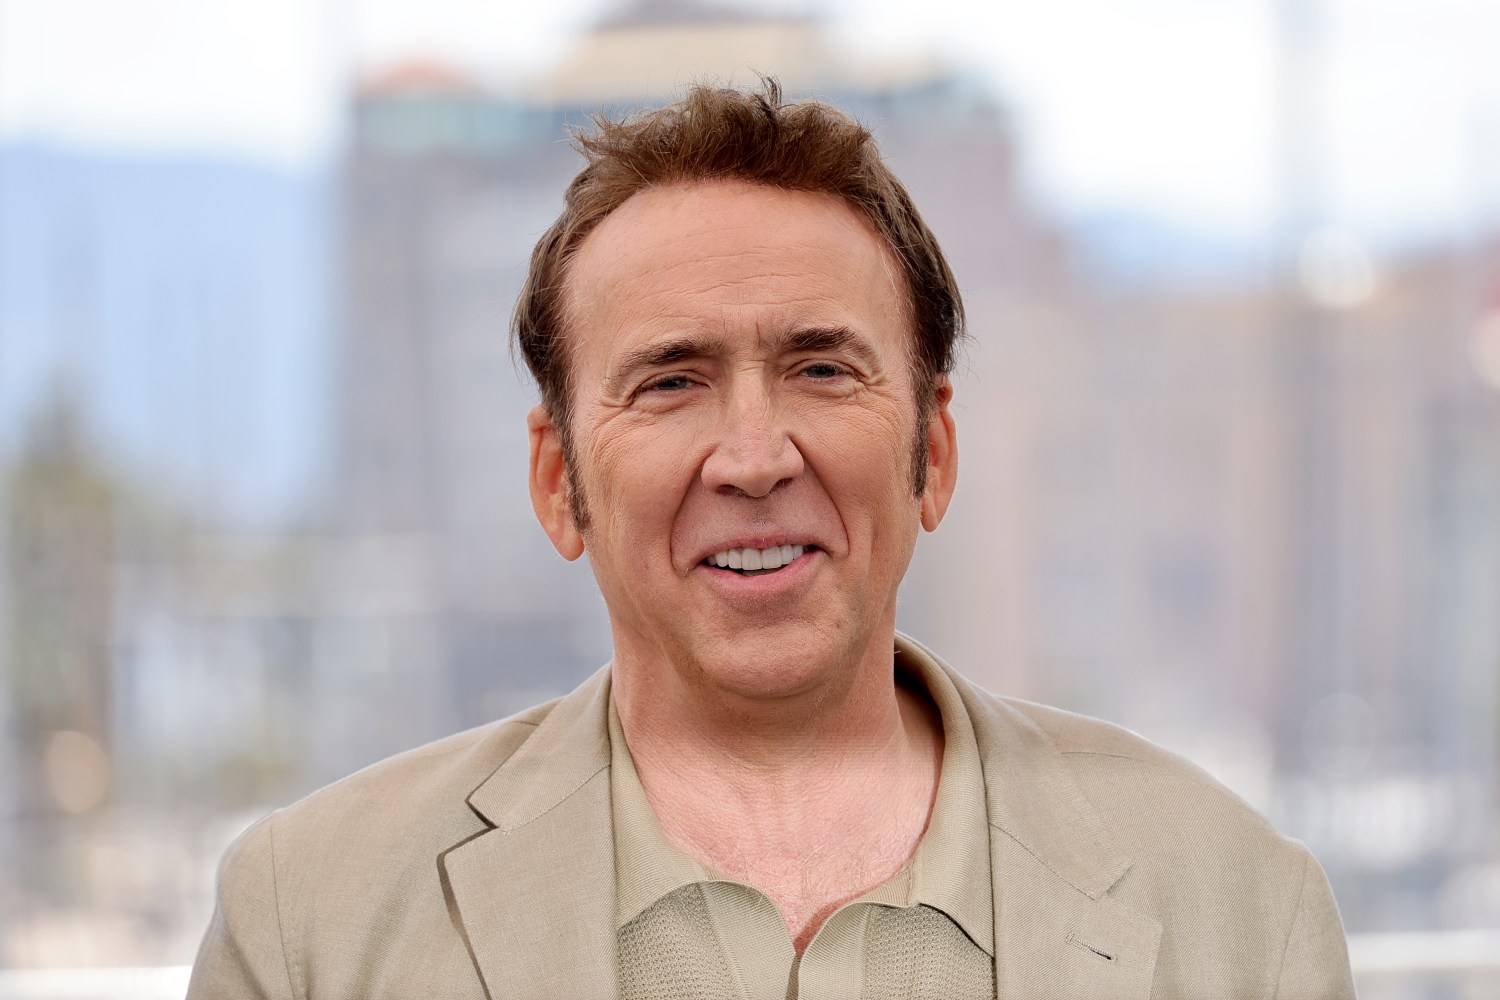 Nicolas Cage Is ‘Terrified’ of AI and Got Digitally Scanned for Spider-Man Noir: ‘I Don’t Want You to Do Anything’ With My Face and Body ‘When I’m Dead’